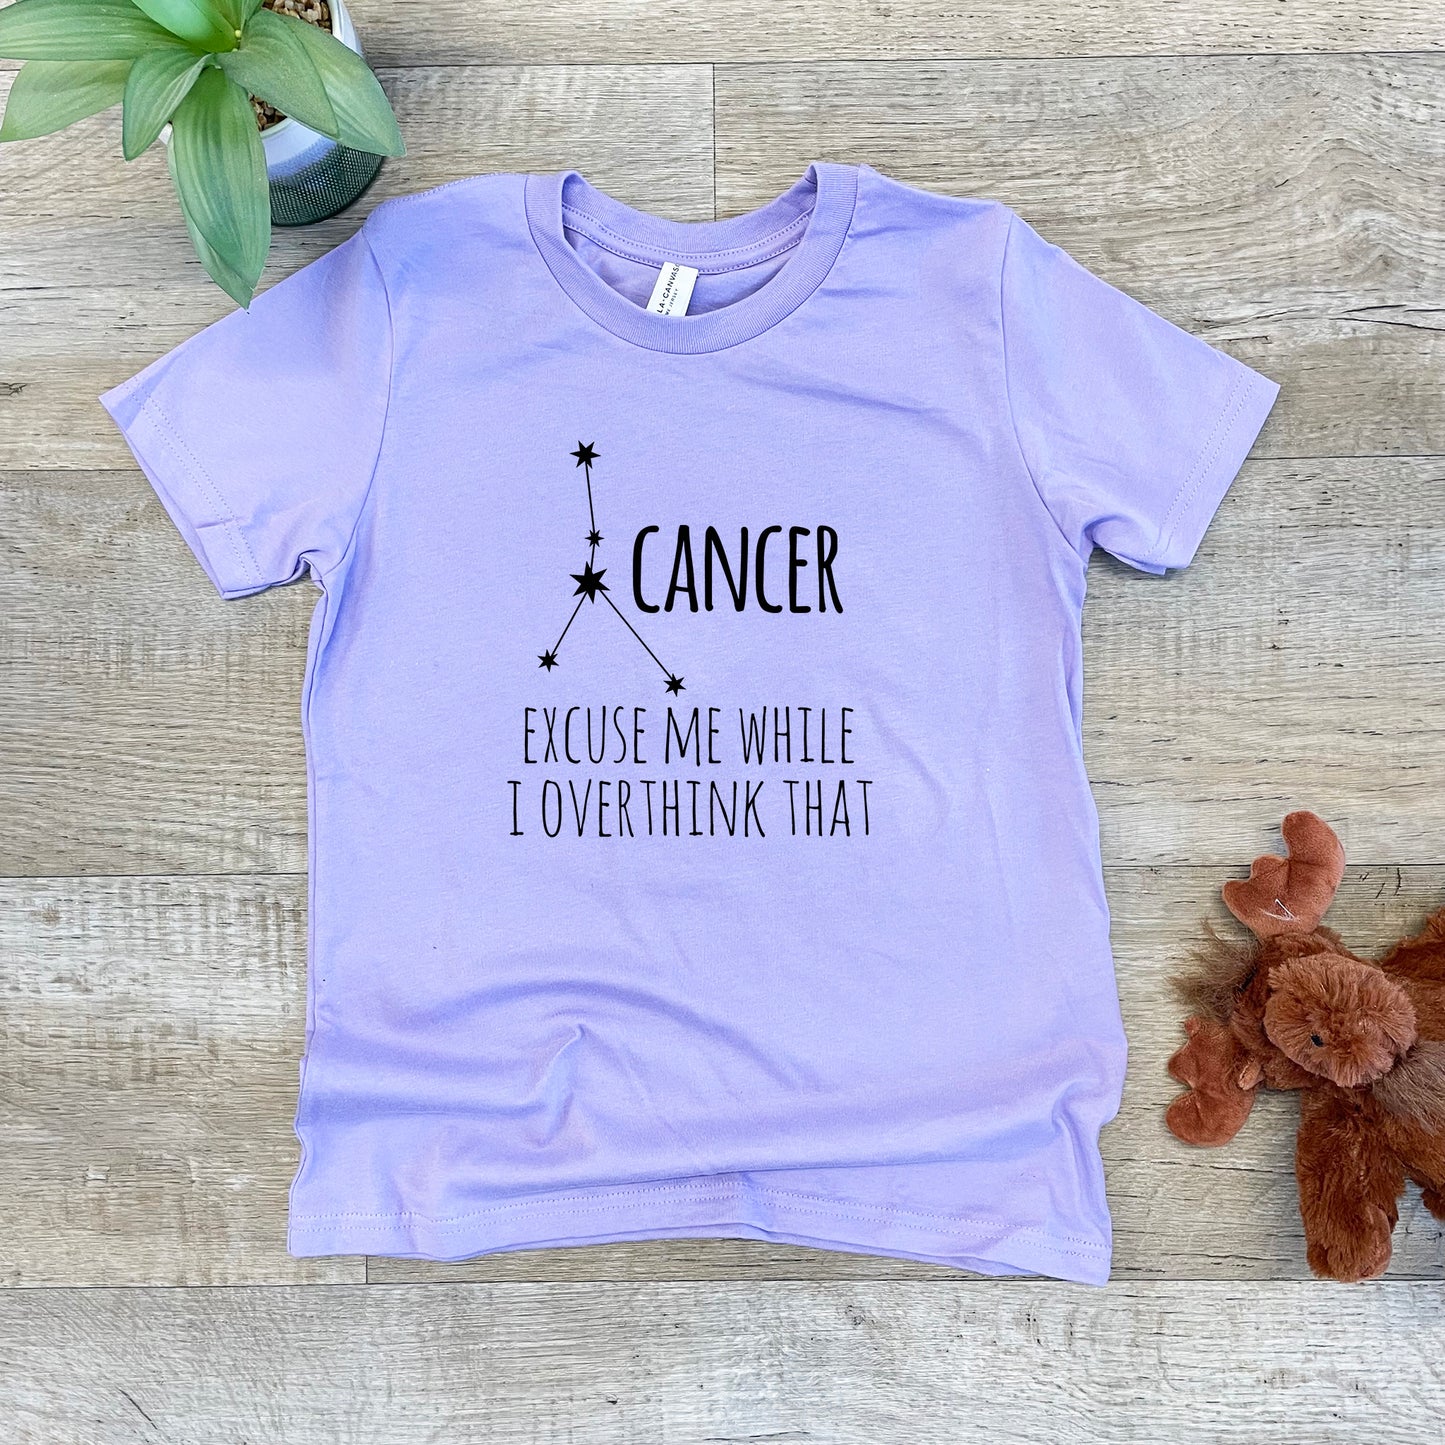 Cancer - Kid's Tee - Columbia Blue or Lavender